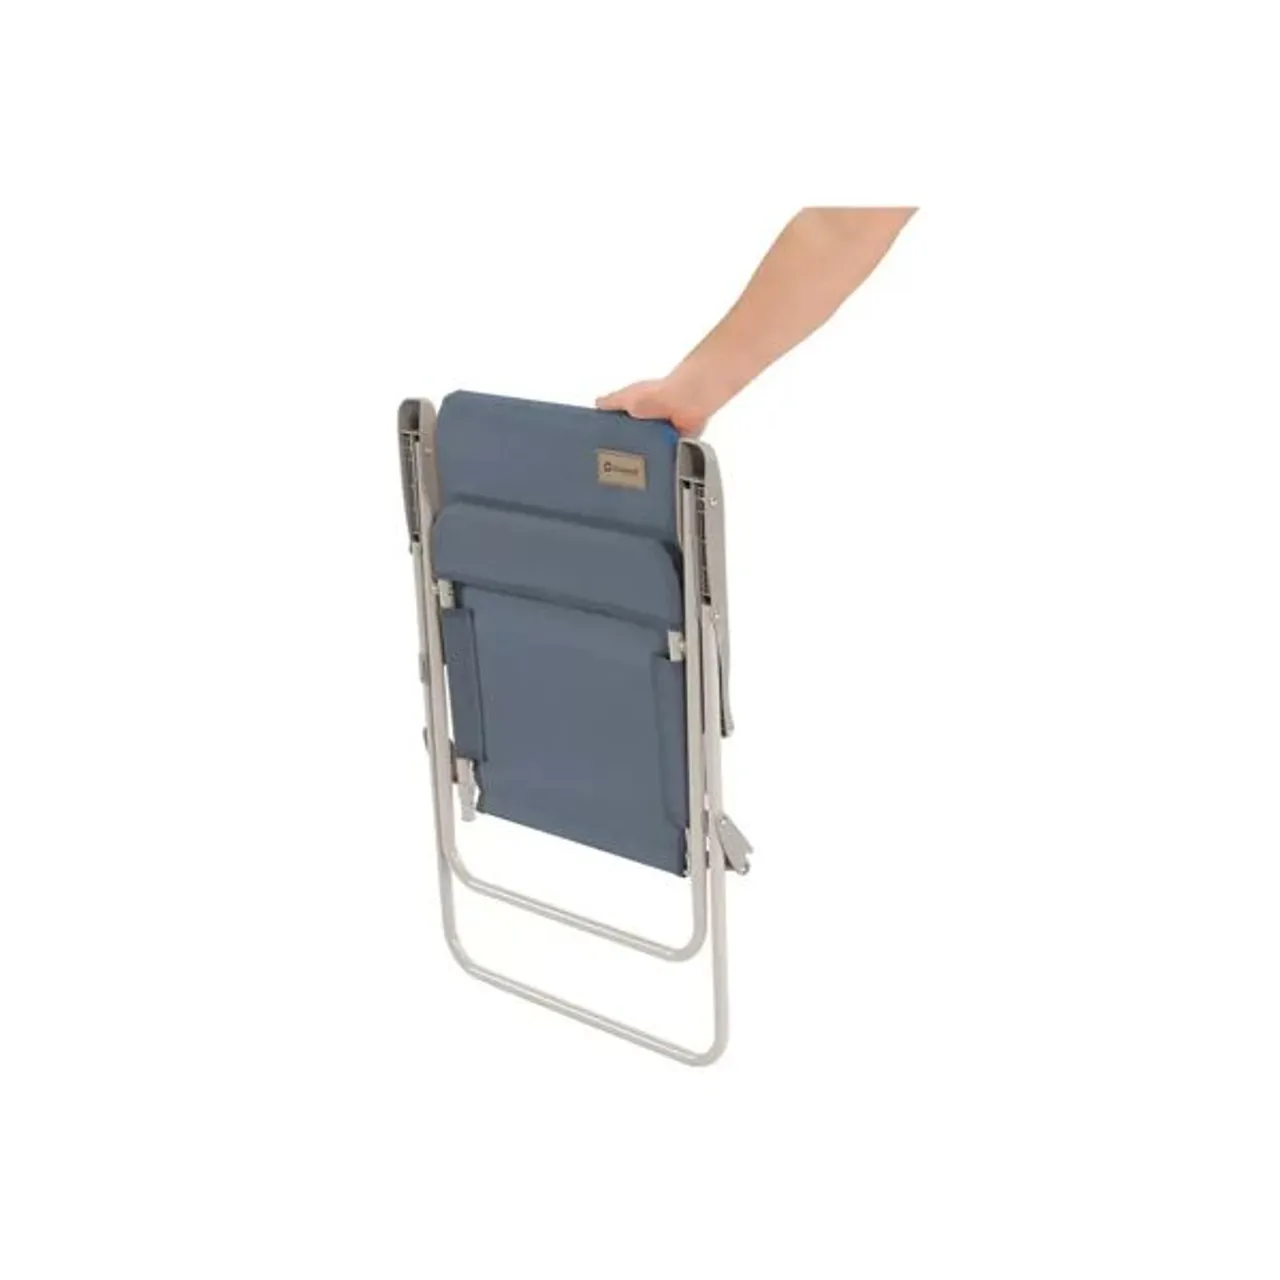 Outwell Blackpool Camping Chair - Ocean Blue - Unisex